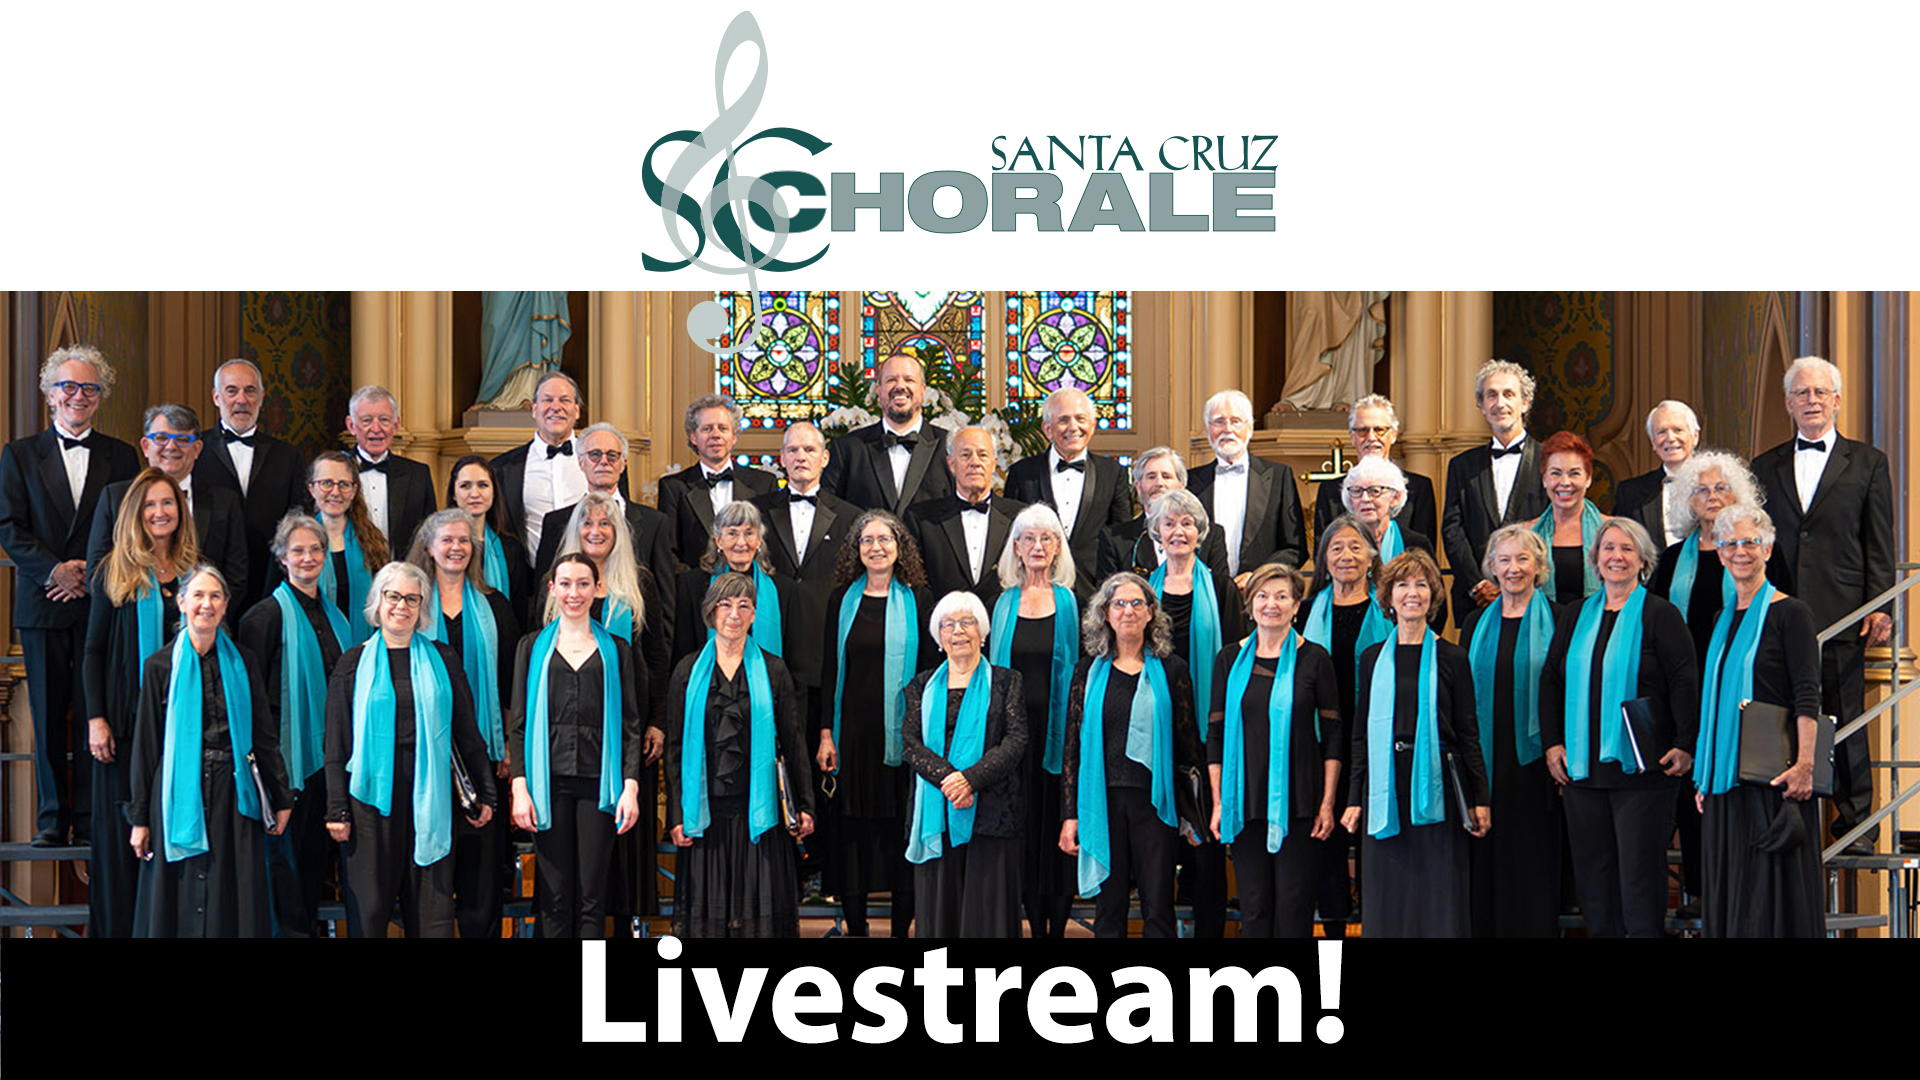 The Santa Cruz Chorale in concert dress with words "Livestream!"